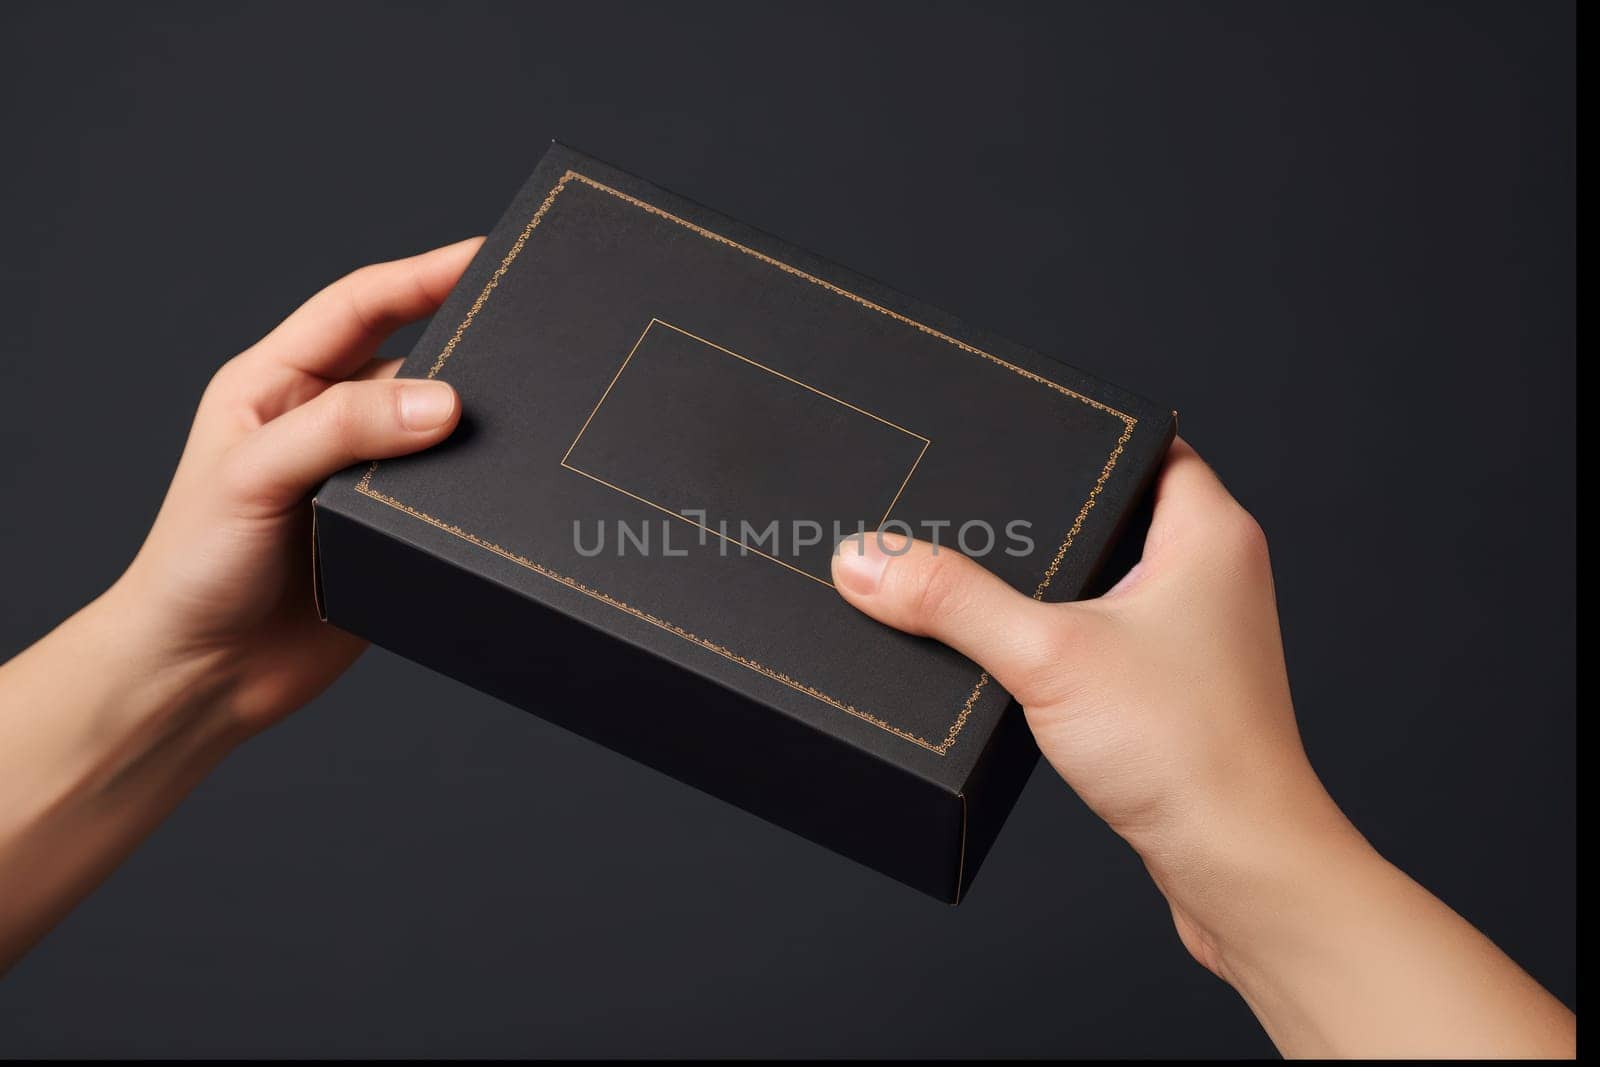 a hand holding a mailing box mockup delivery service concept photo.